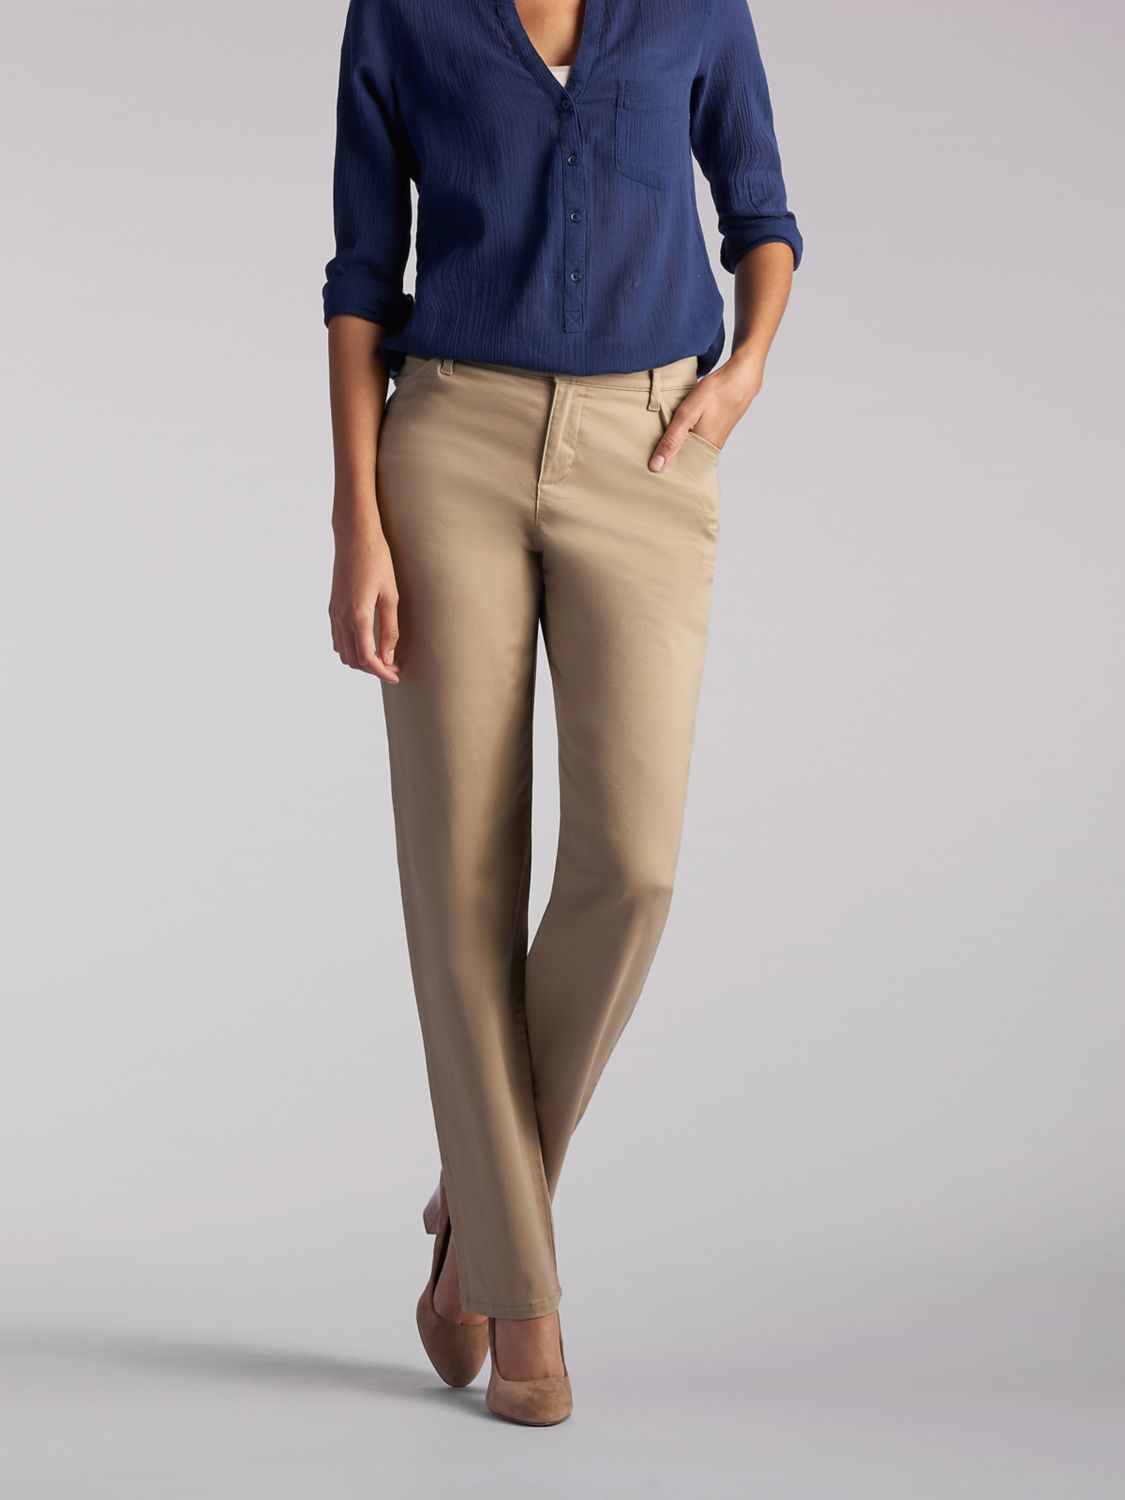 Relaxed Fit Straight Leg Pant All Day Work Pant in Flax from Front View